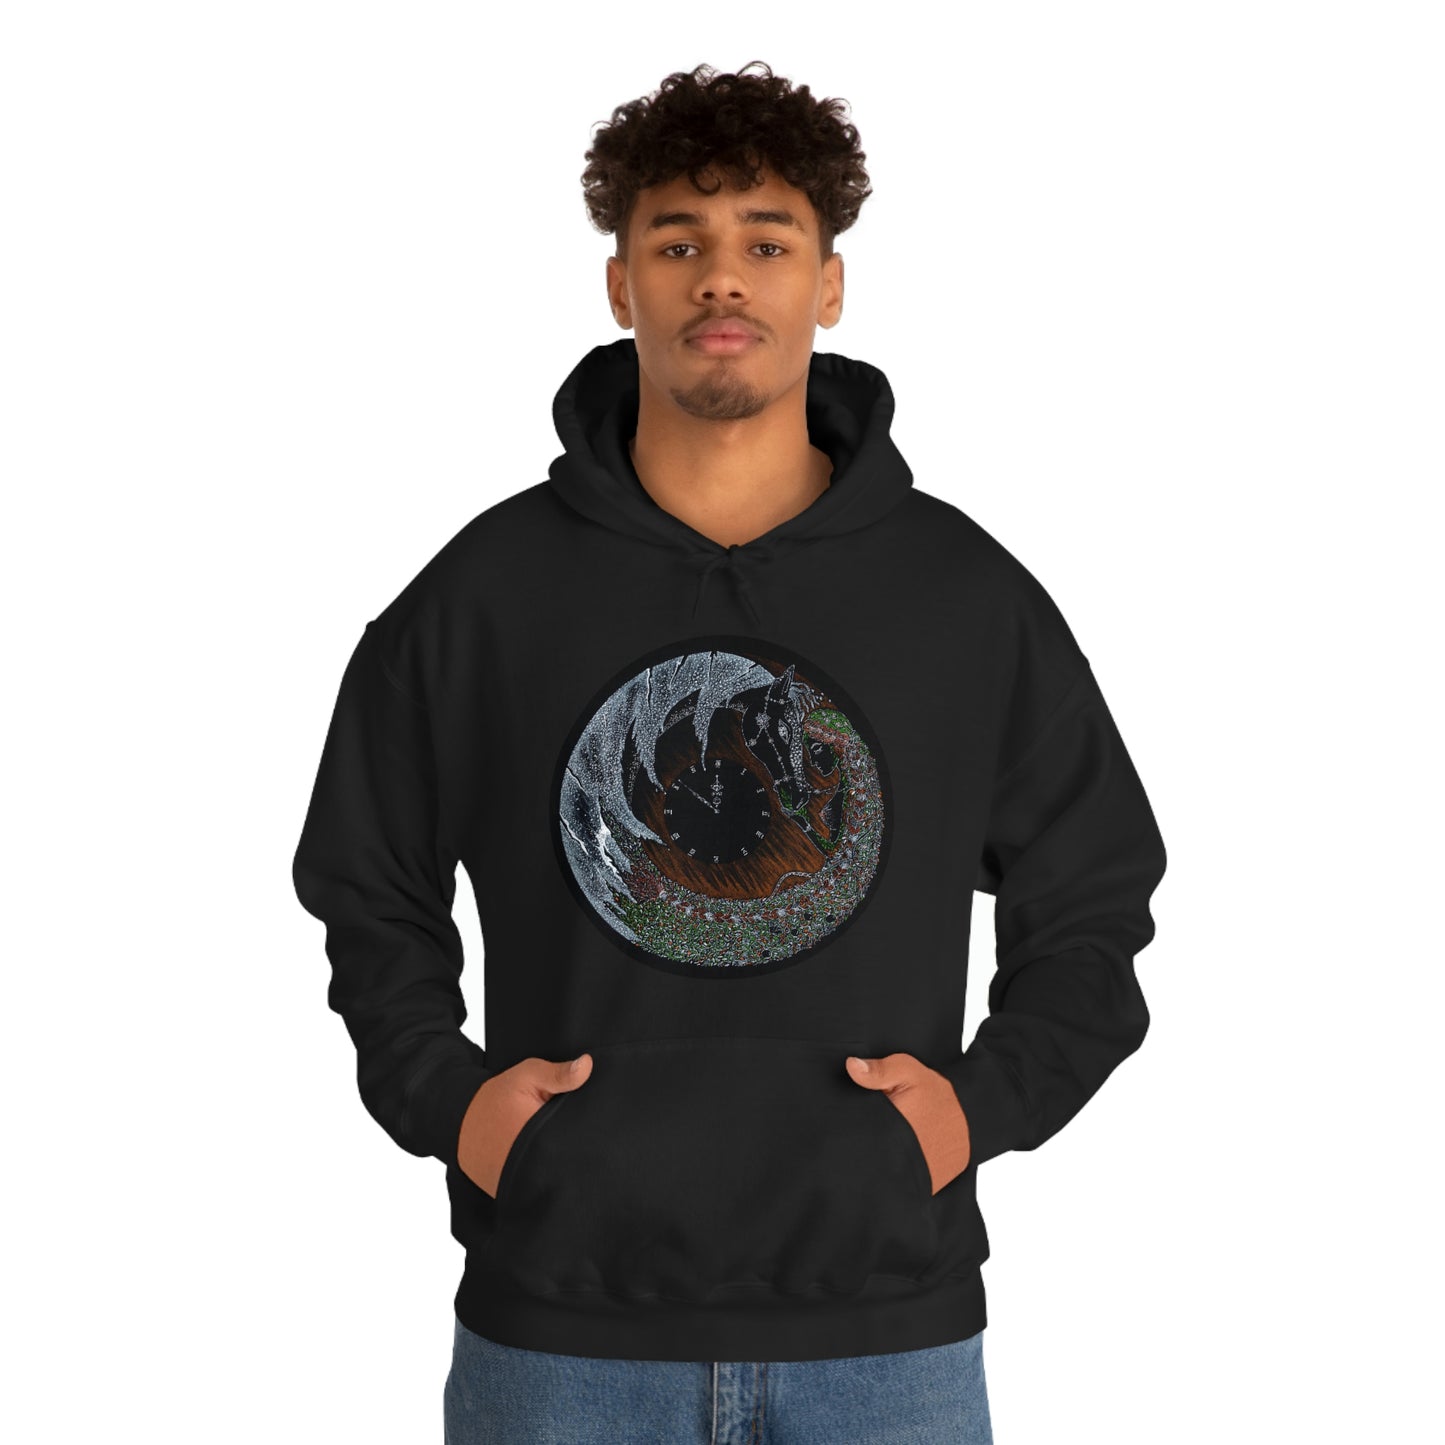 Chinese Zodiac Sign Hoodie (Horse)